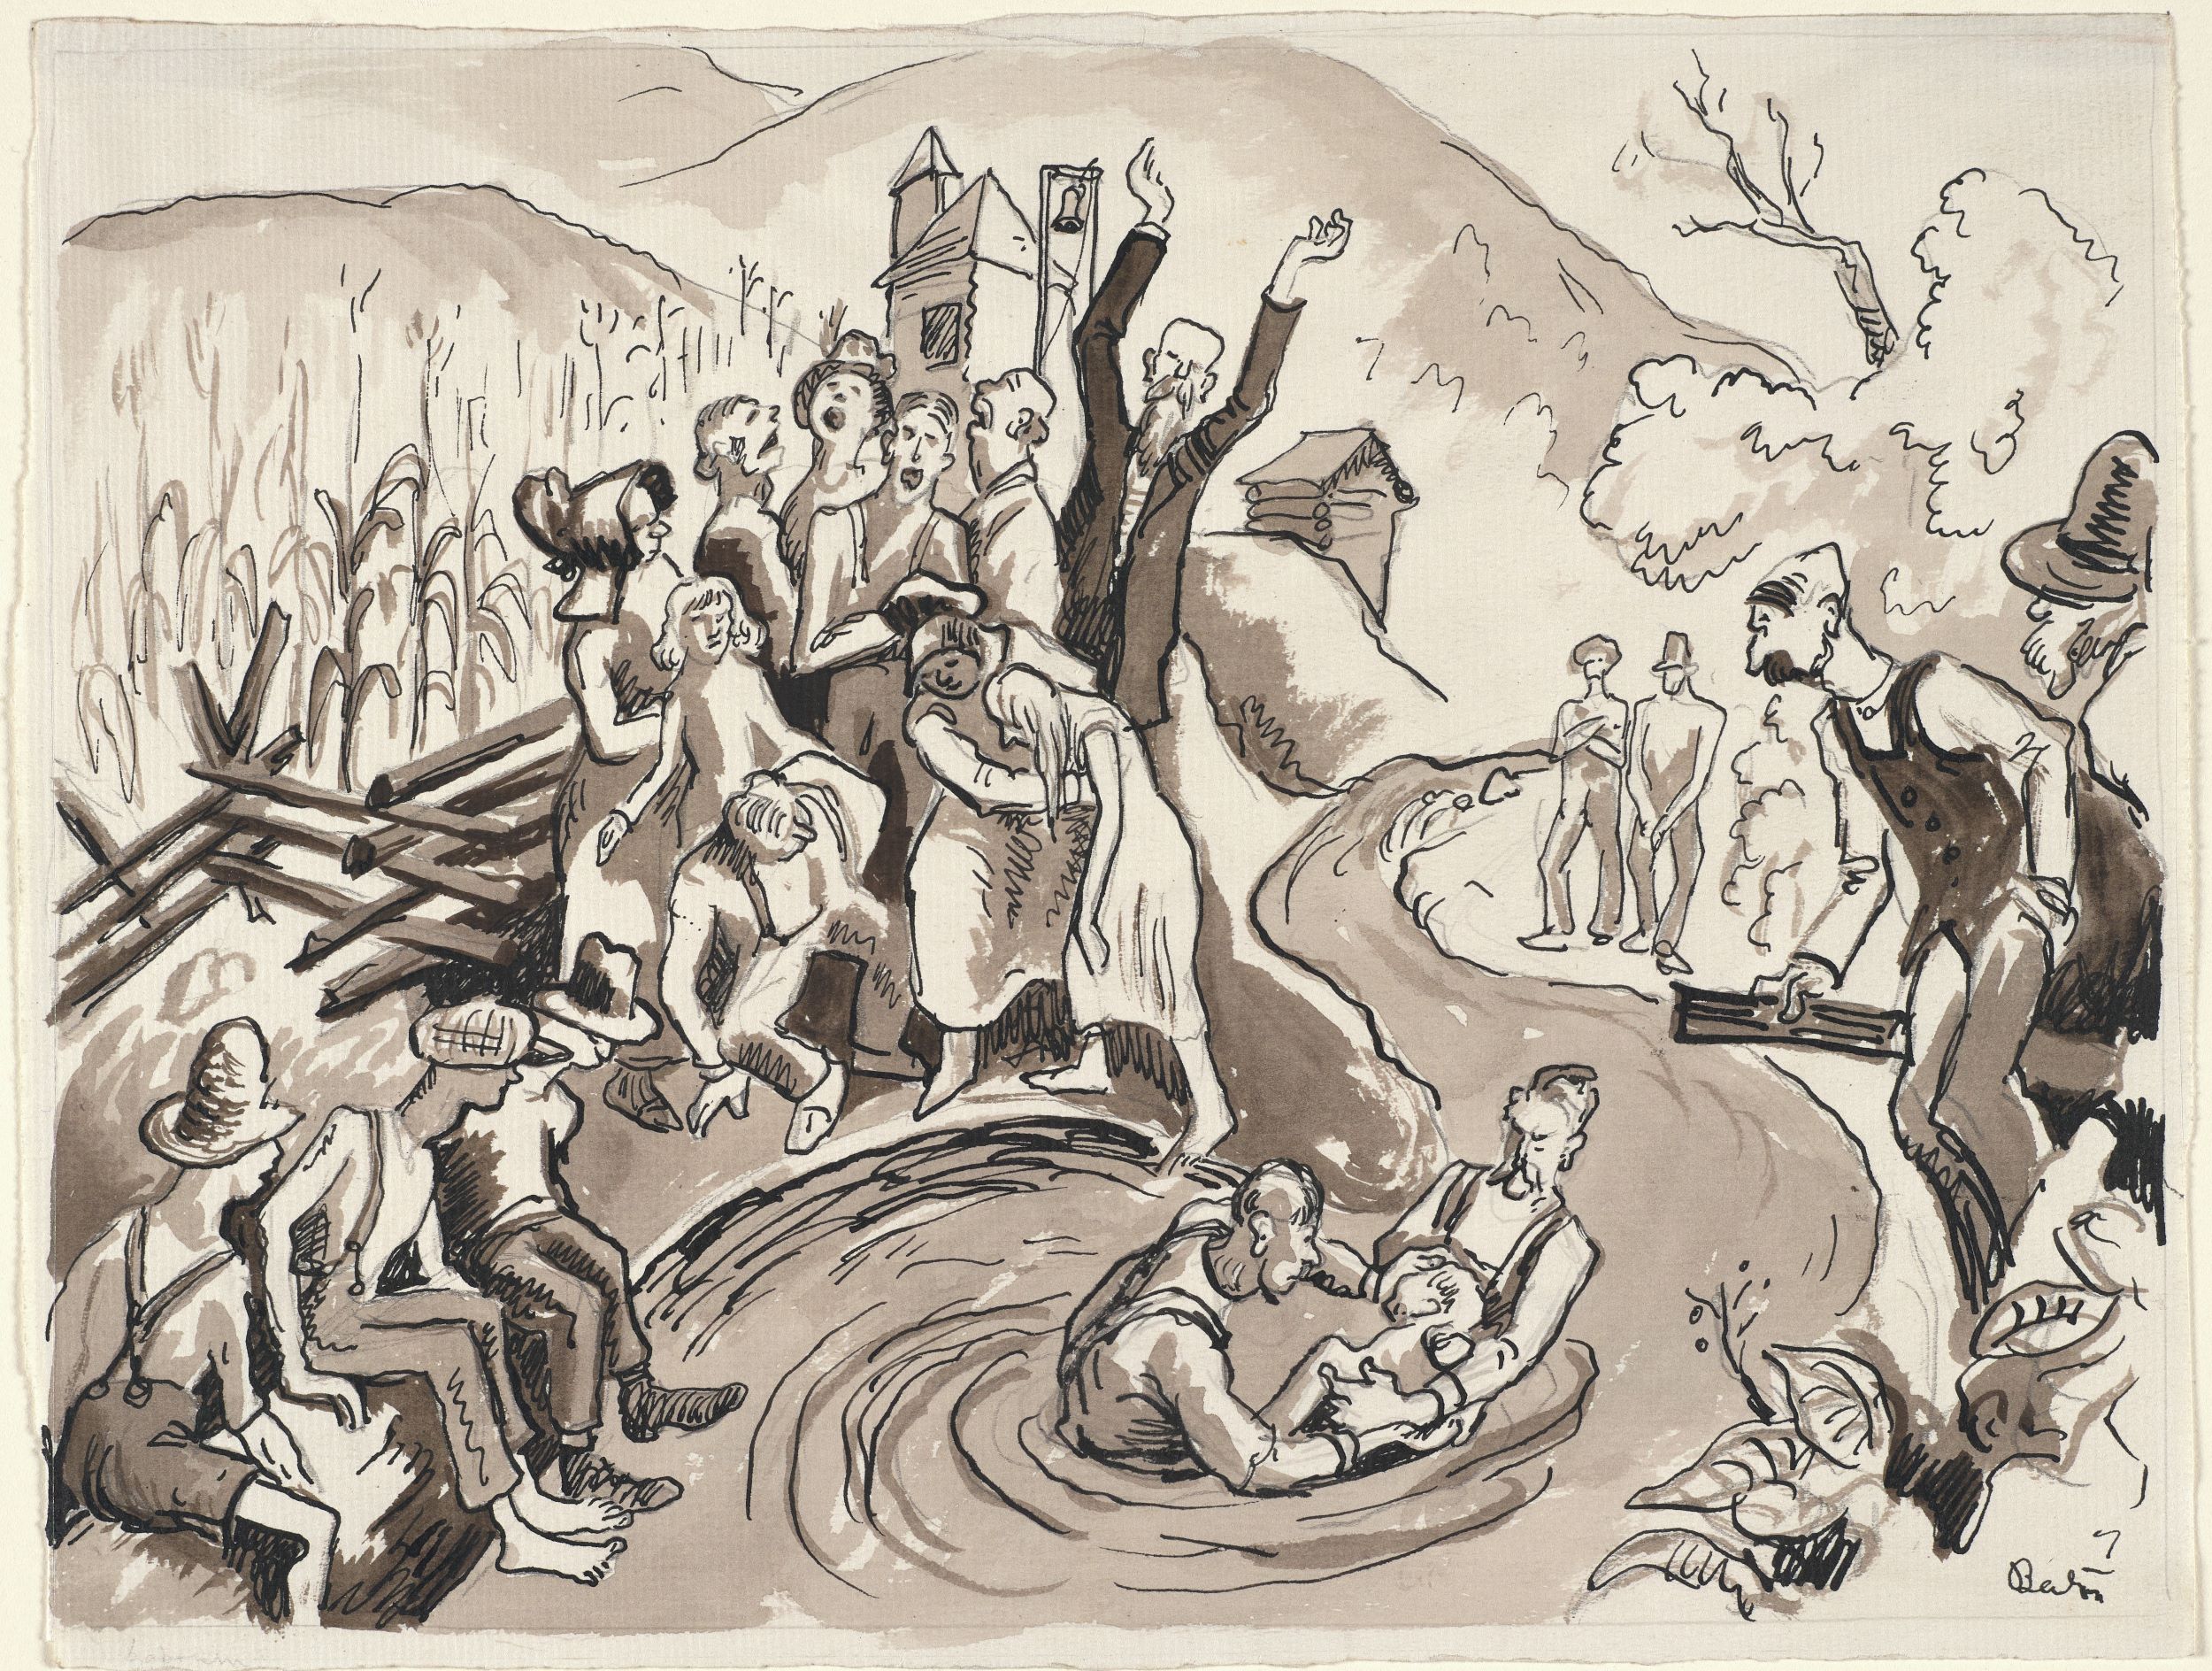 Black-and-white ink drawing of a woman being baptized in a river by two men in overalls, while observers on the banks make expressive gestures. Behind them are cornfields, low hills, and a steepled church.